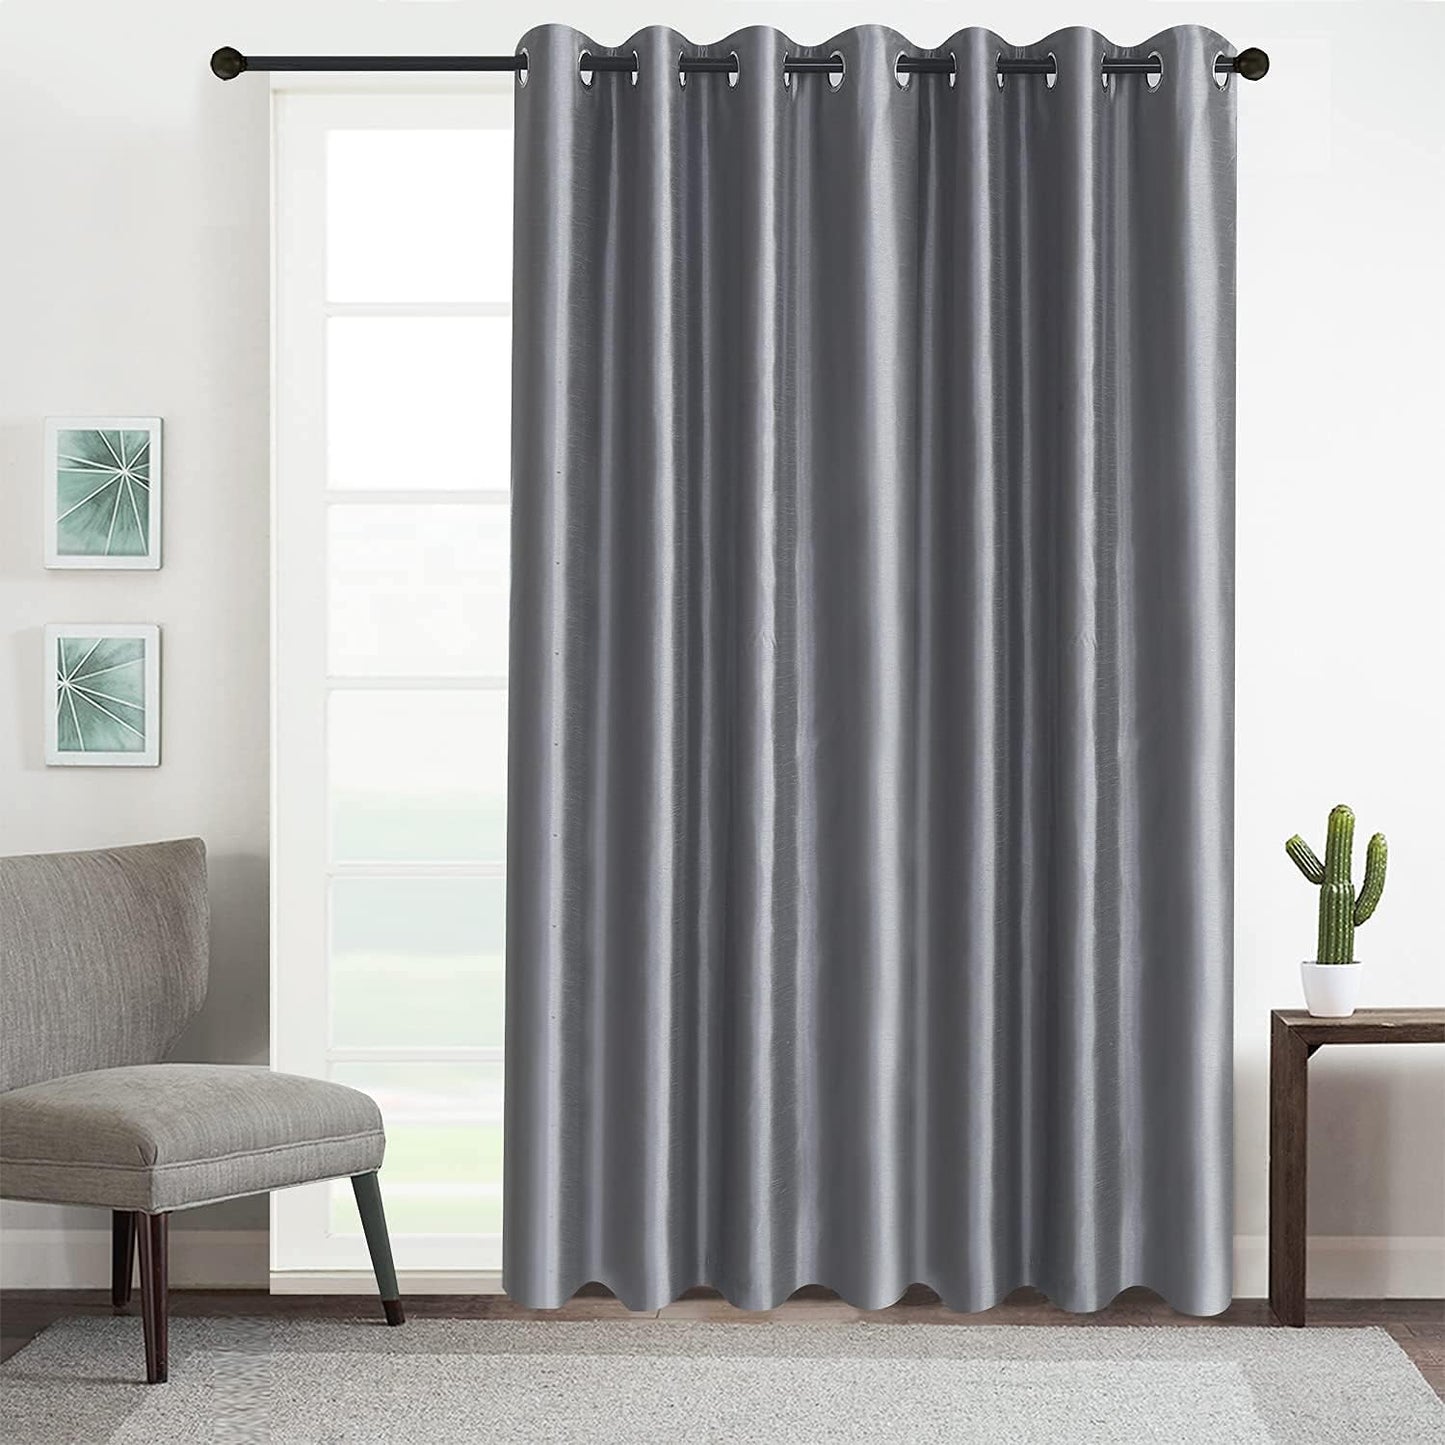 GYROHOME Faux Silk Room-Darkening Blackout Curtains (Beige Liner) Solid Window Treatment Drapes for Bedroom Living Room, Thermal Insulated Grommet Top (2Panels, 52X108Inch,Sliver Gray)  GYROHOME Sliver Grey 100Wx96Lx1 